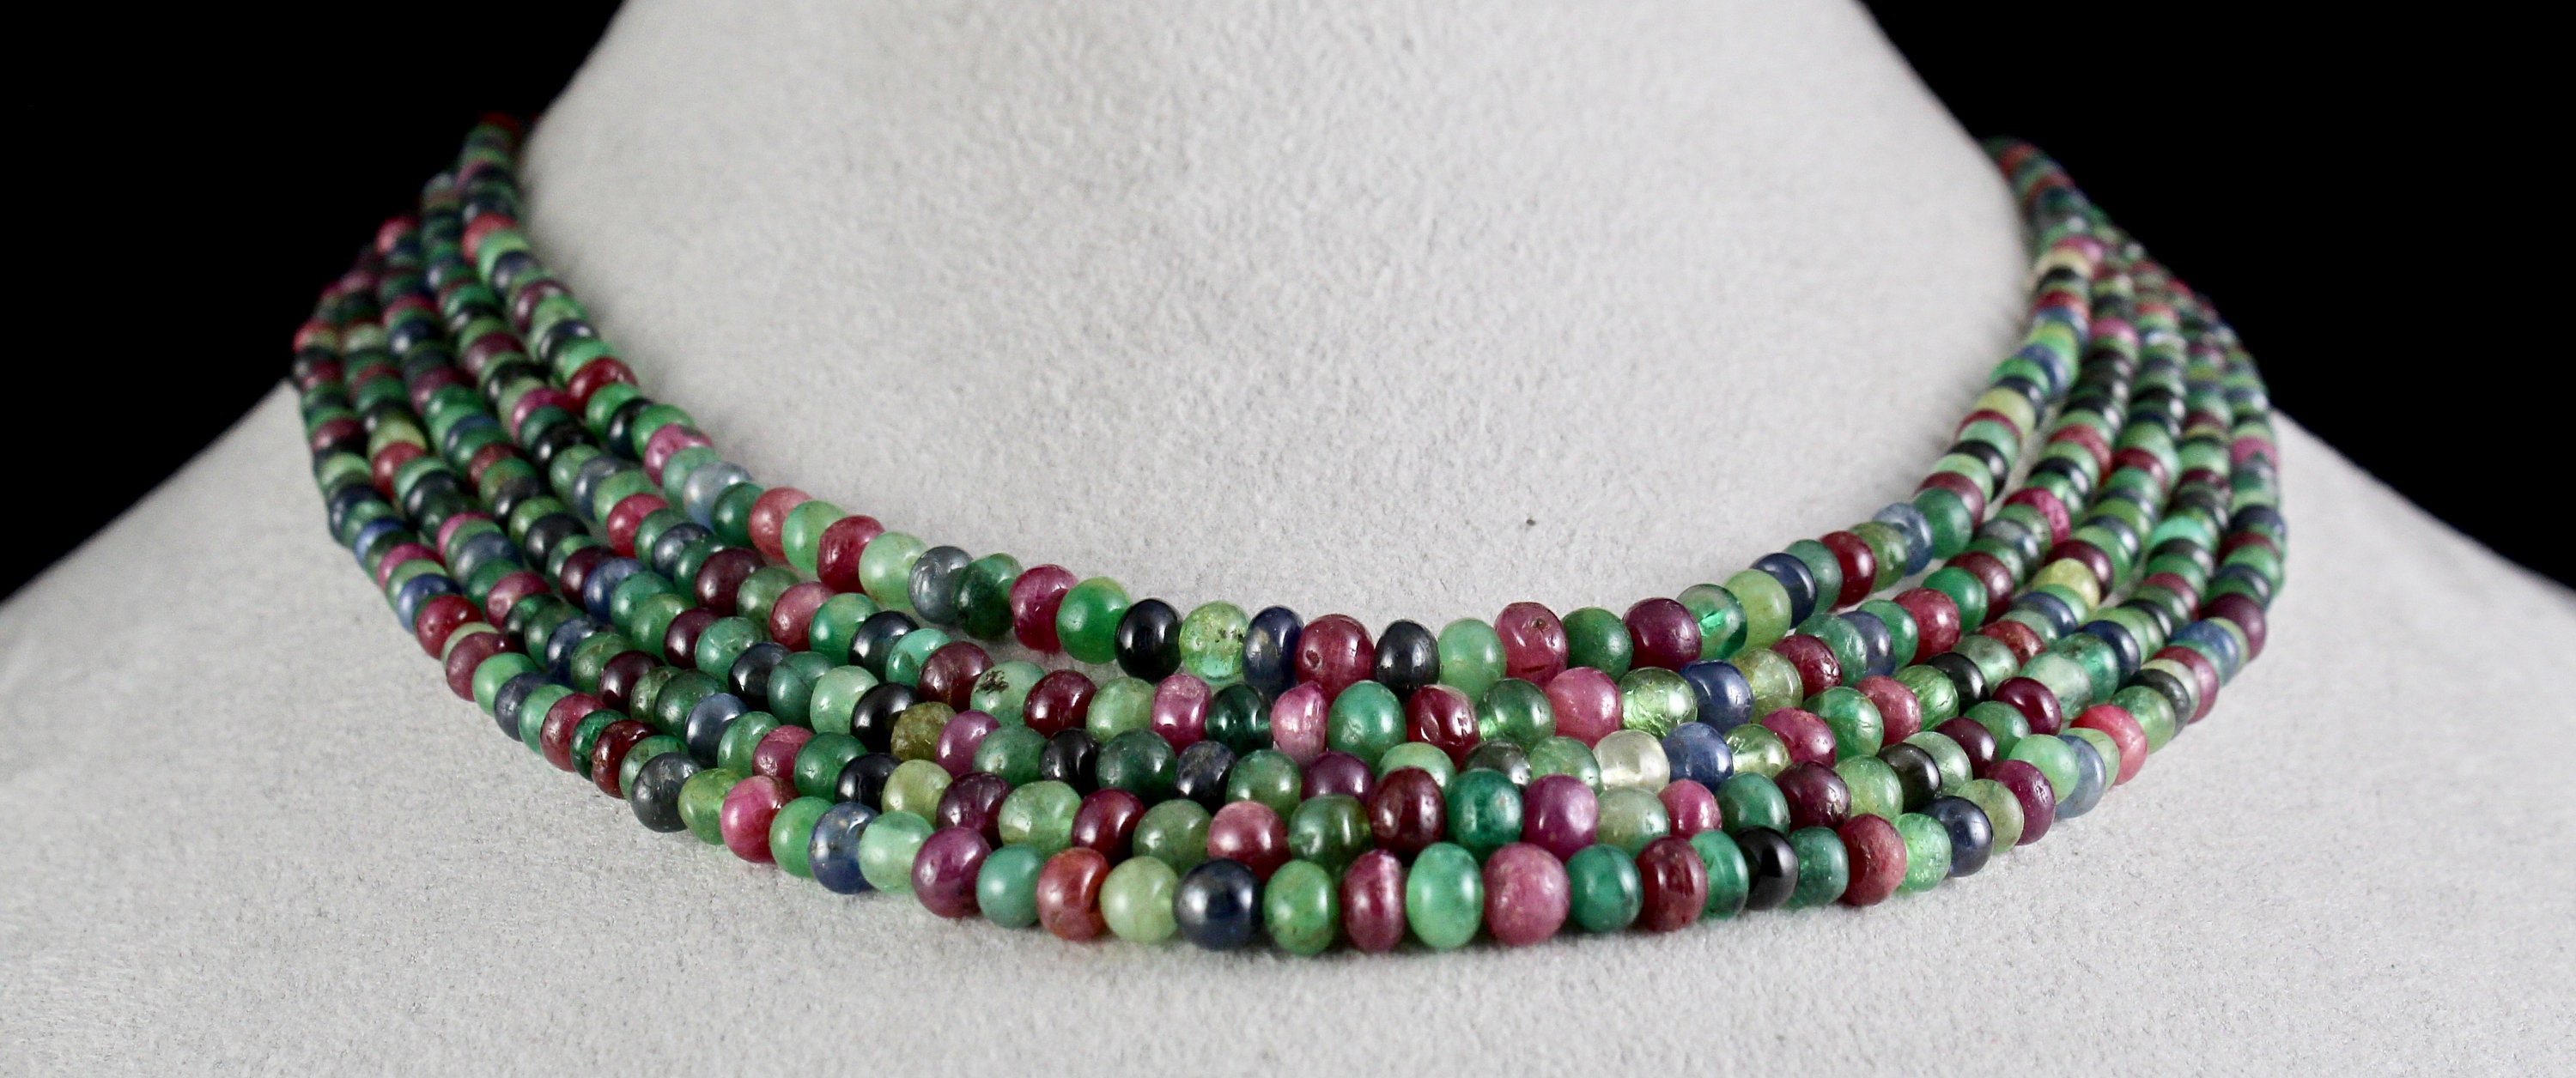 588.00 CTS EARTH MINED RUBY EMERALD & SAPPHIRE 6 LINE ROUND BEADS NECKLACE 